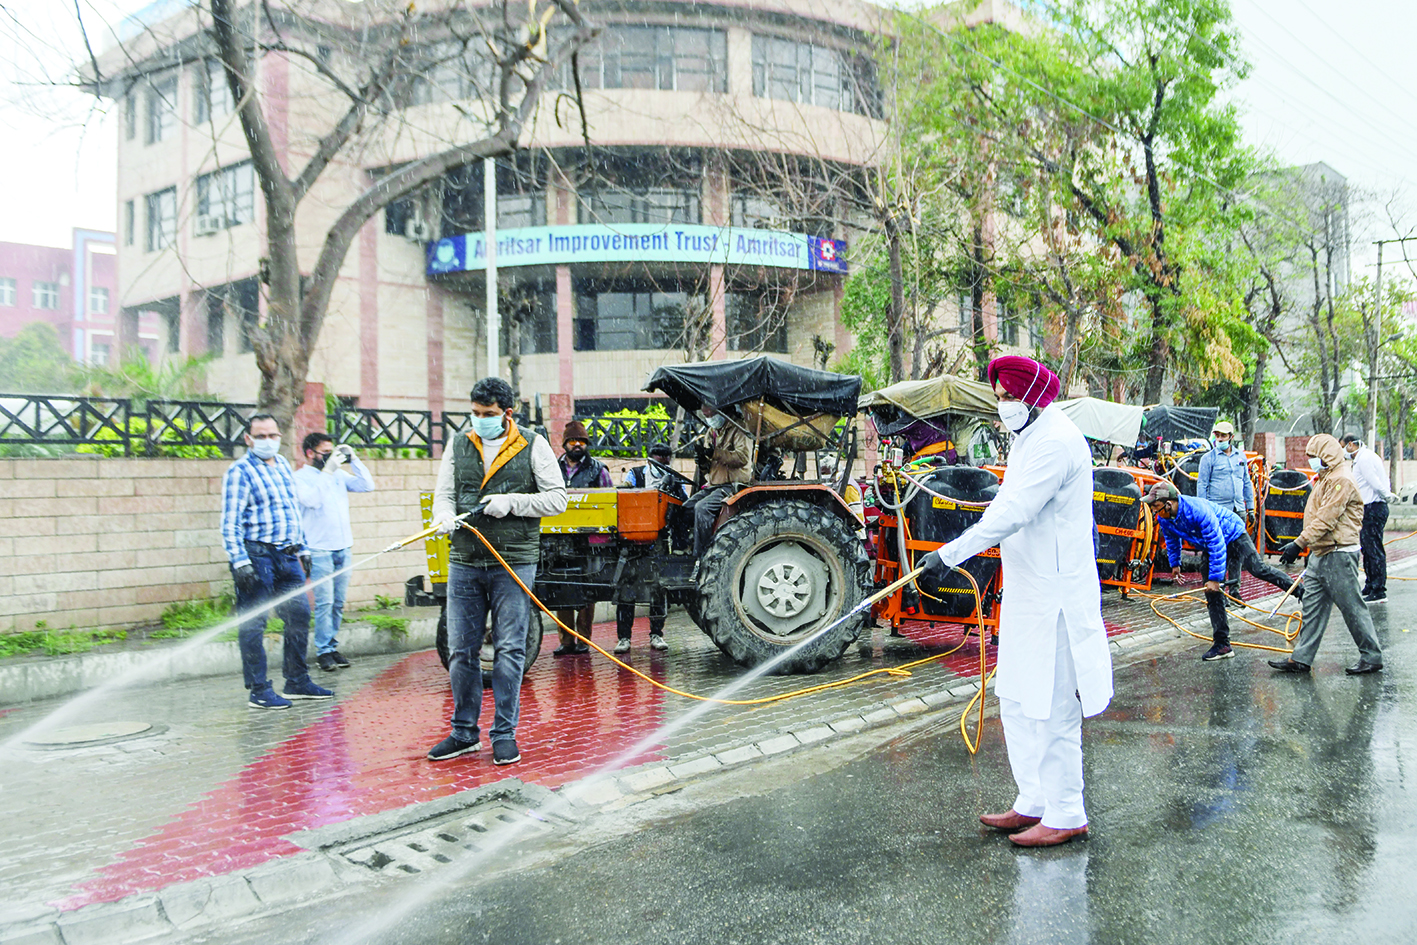 Member of Parliament (MP) Gurjeet Singh Aujla (C-R) and Amritsar Improvement Trust Chairman Dinesh Bassi (C-L) clean a street during a government-imposed nationwide lockdown as a preventive measure against the COVID-19 coronavirus, outside Amritsar Improvement Trust in Amritsar on March 27, 2020. (Photo by NARINDER NANU / AFP)